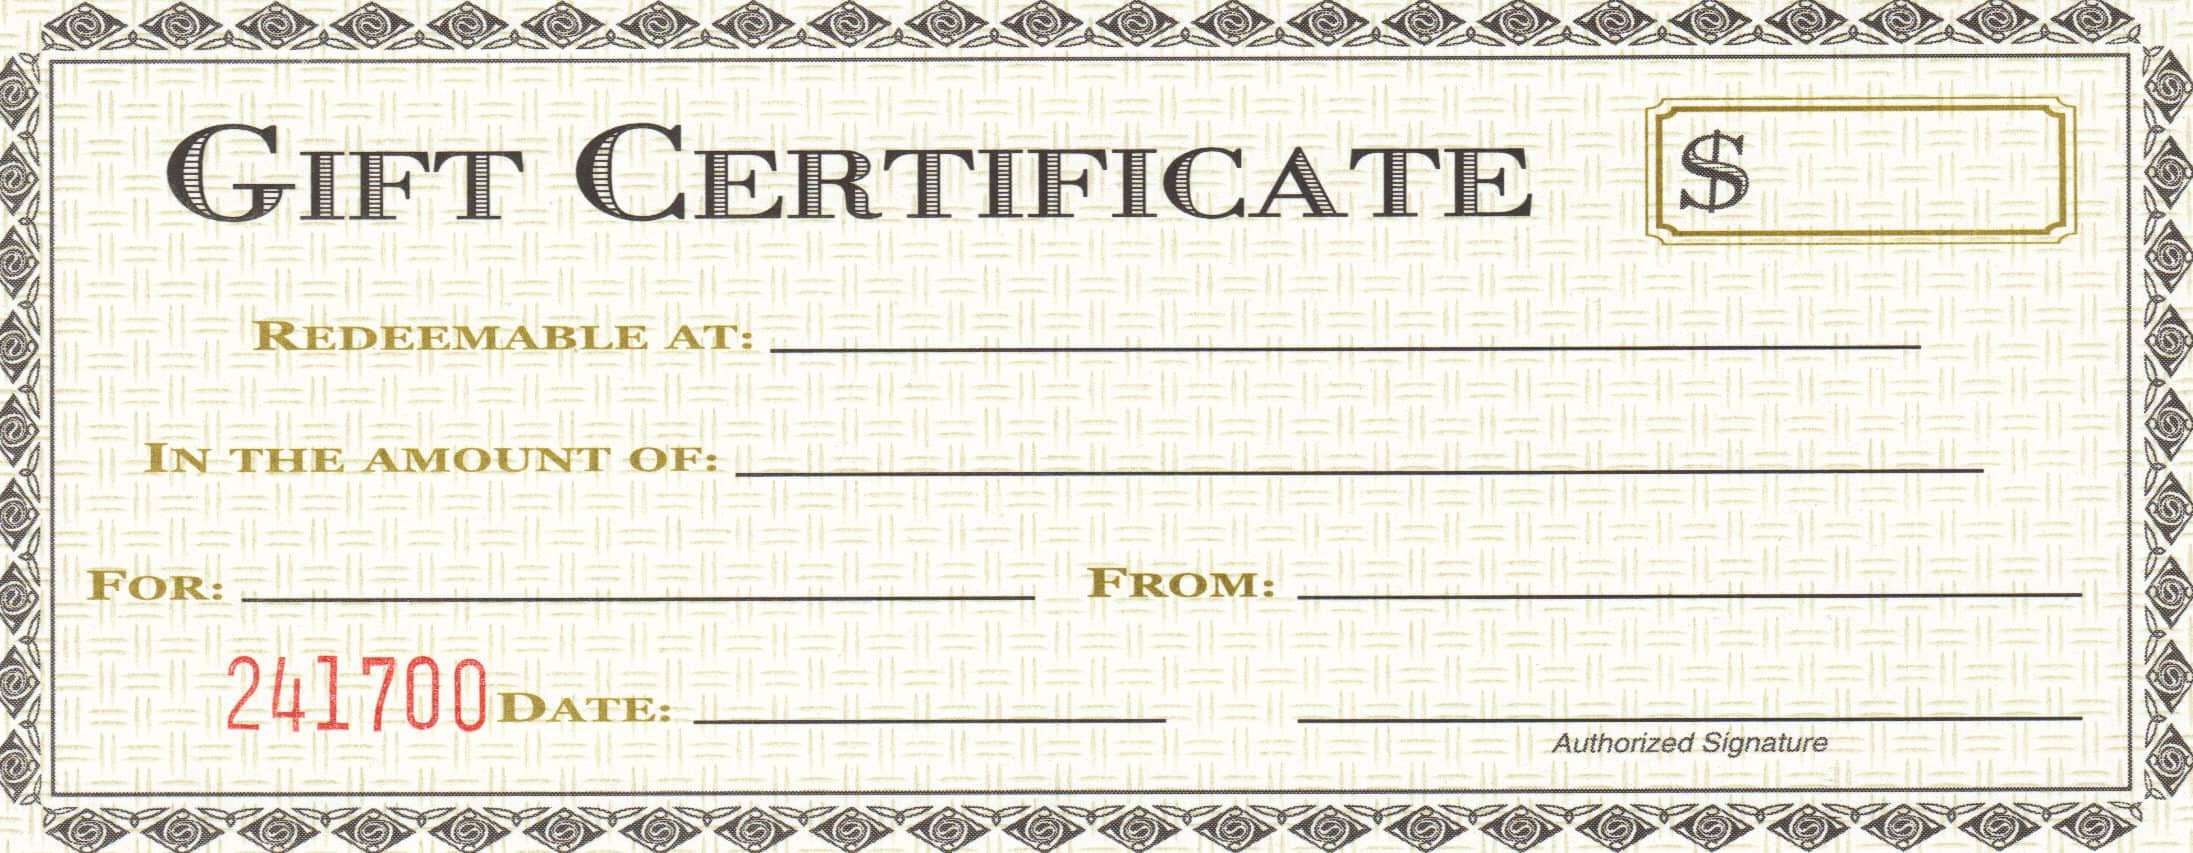 Gift Certificate Templates Free 18 Gift Certificate Templates Excel Pdf formats